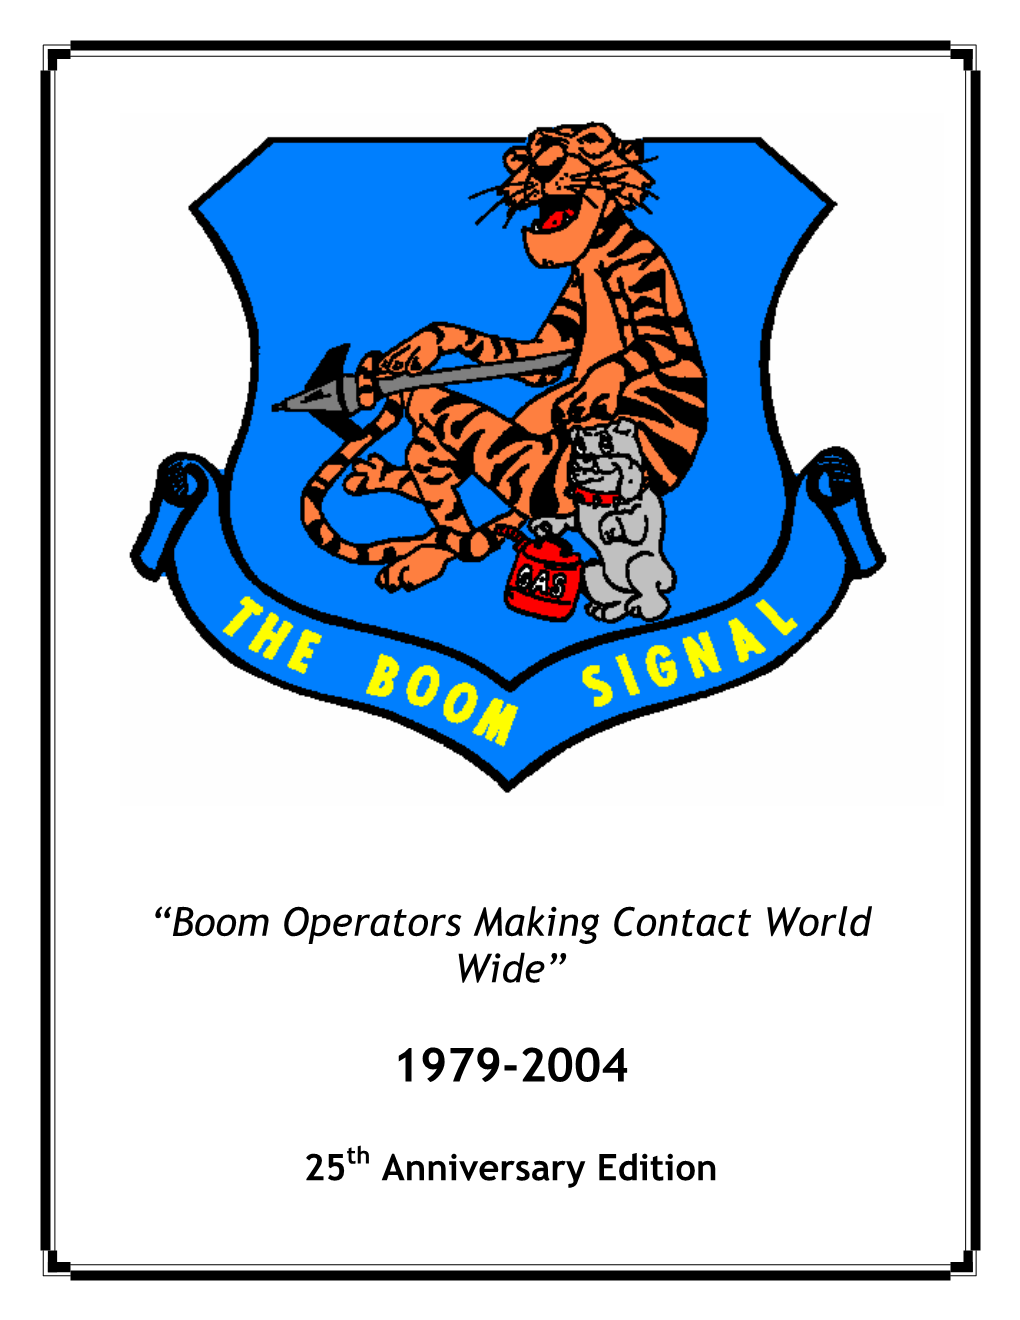 2004 Boom Signal Can Be Directed to Tsgt Paul E